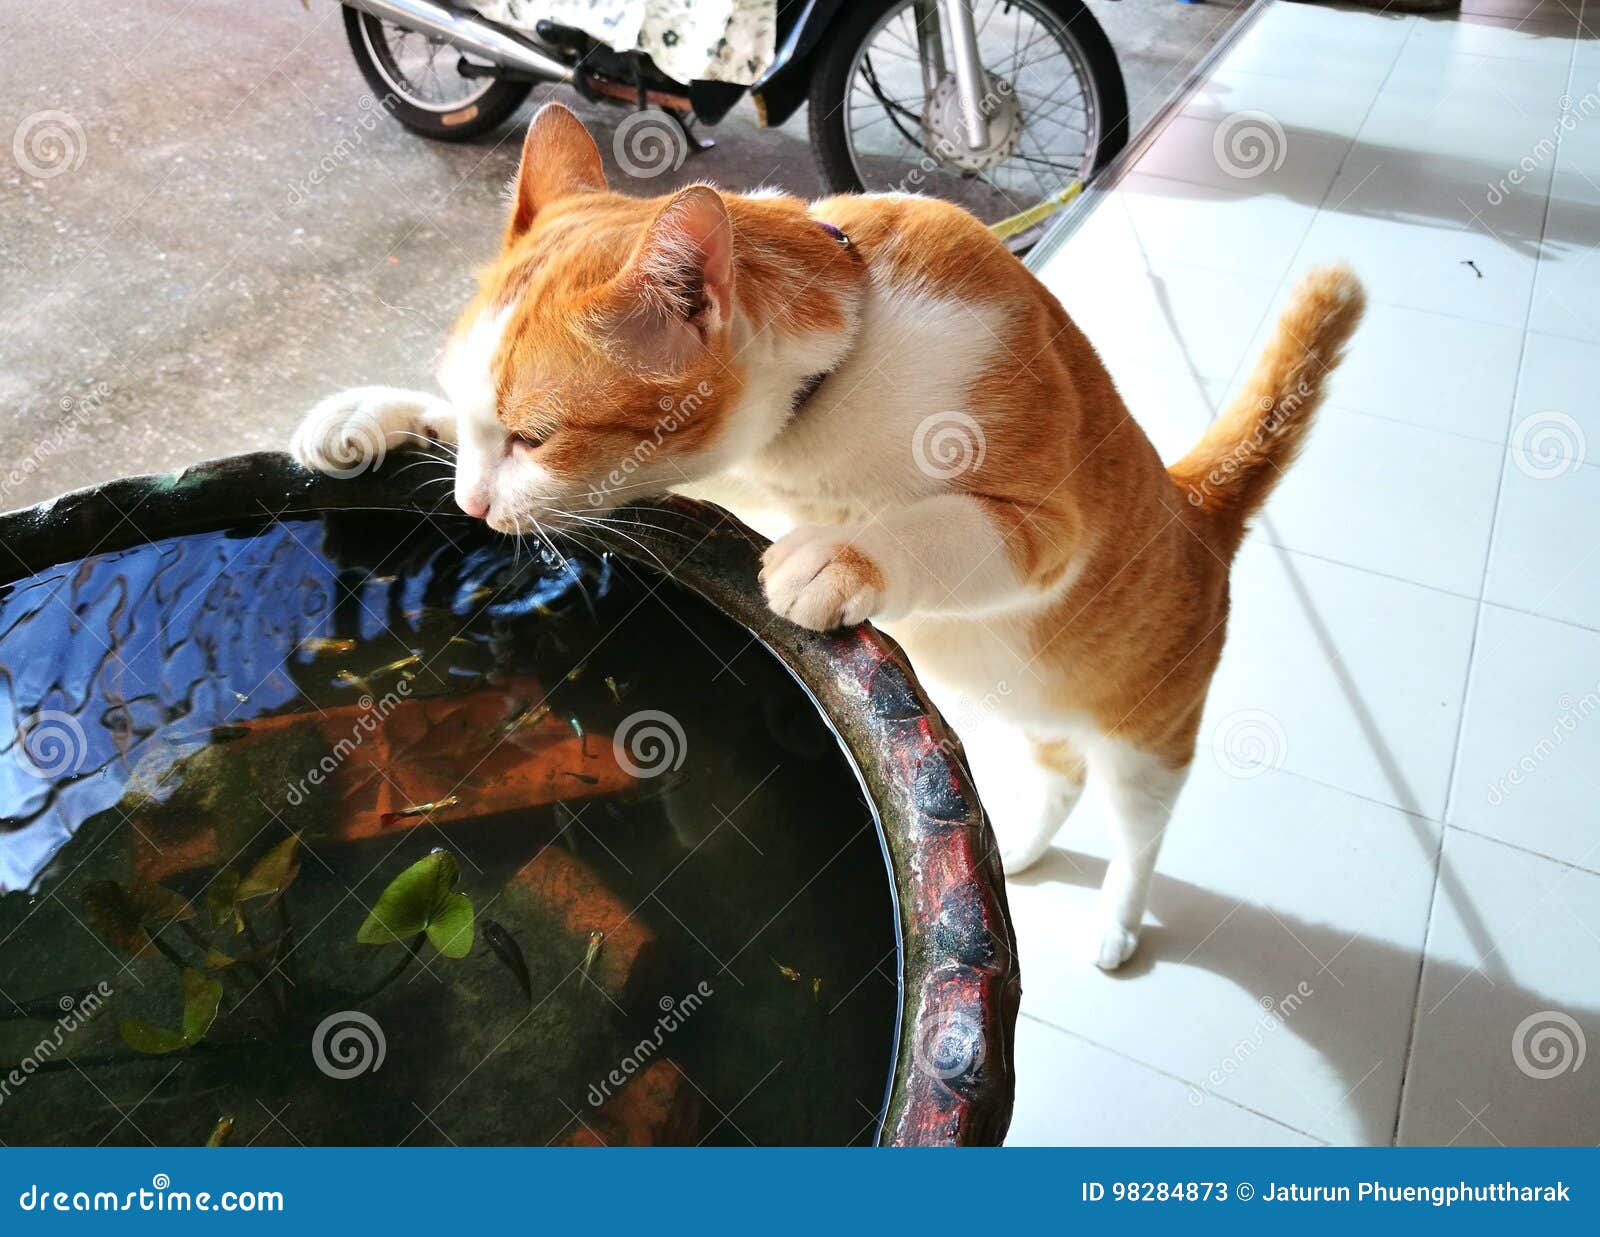 The Cat Is Drinking A Water From The Jar Stock Image Image of lovely